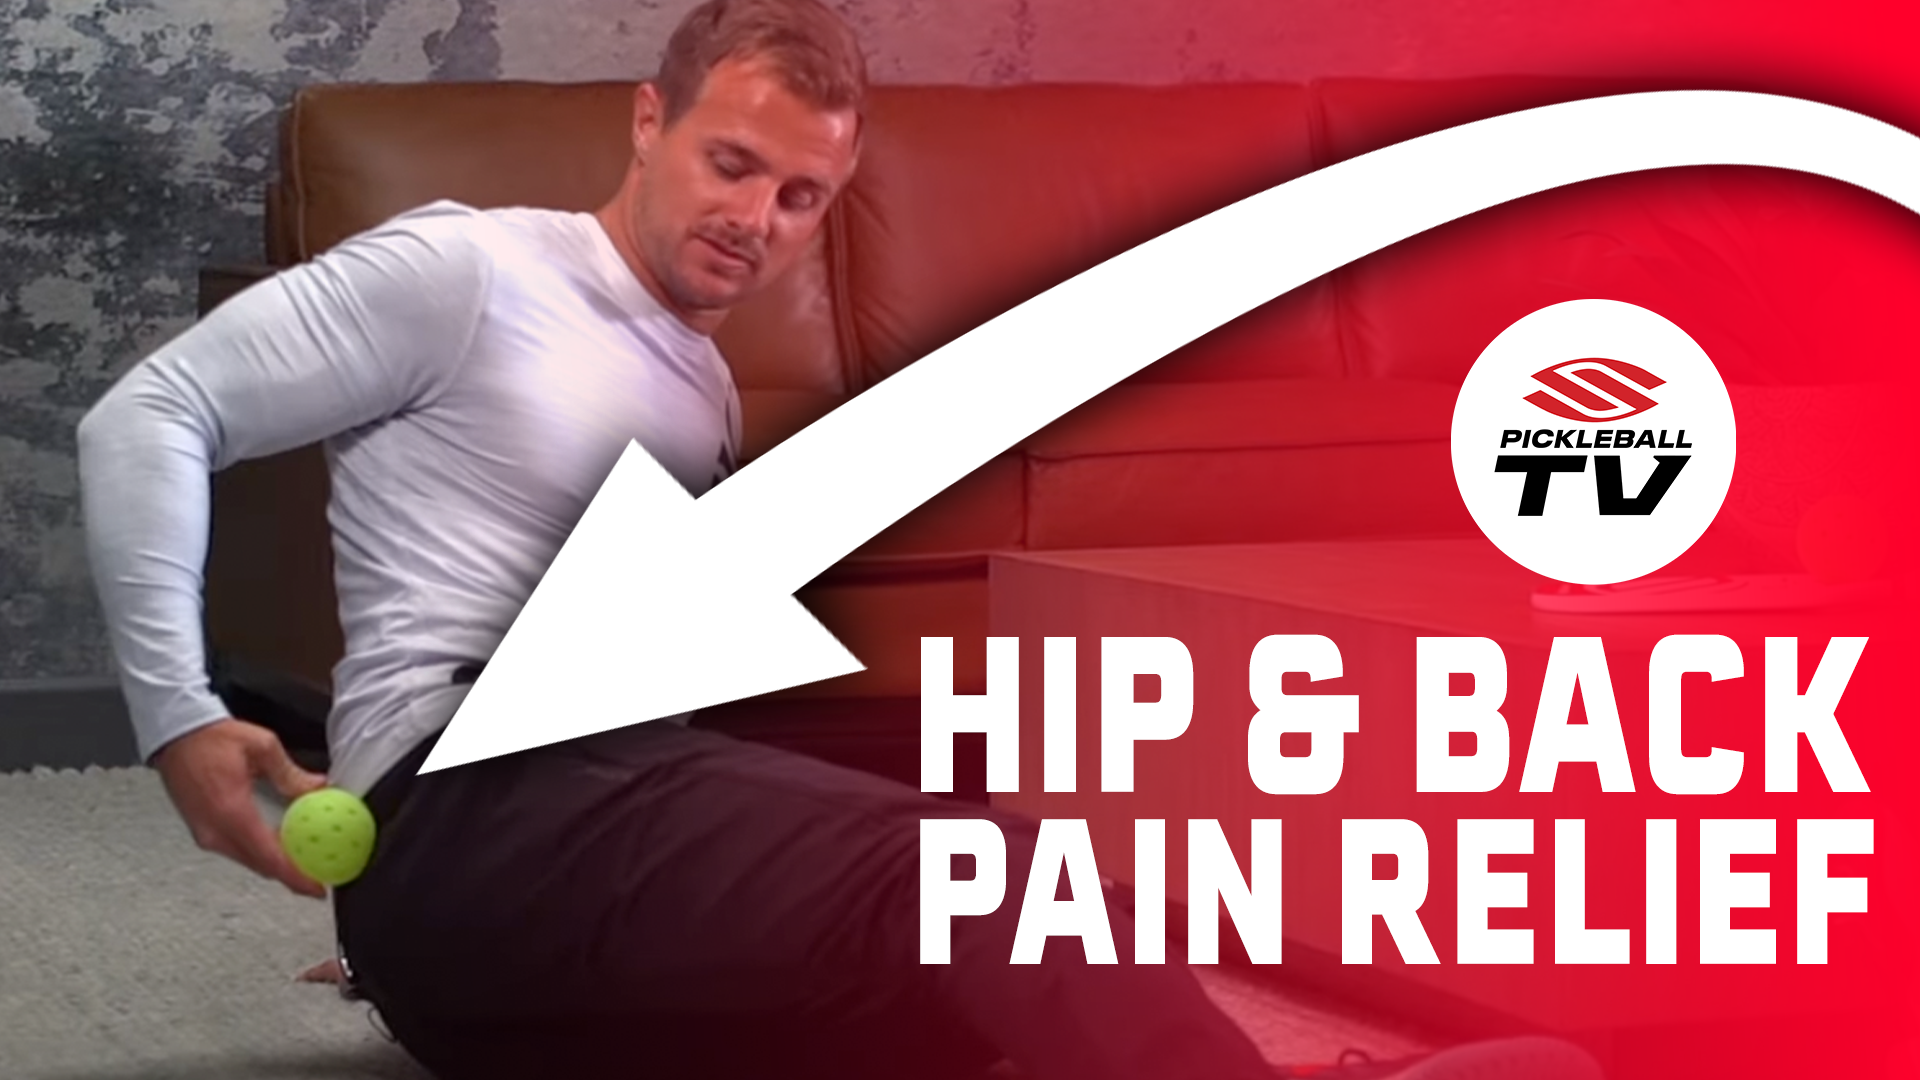 How to relieve pickleball back and hip pain